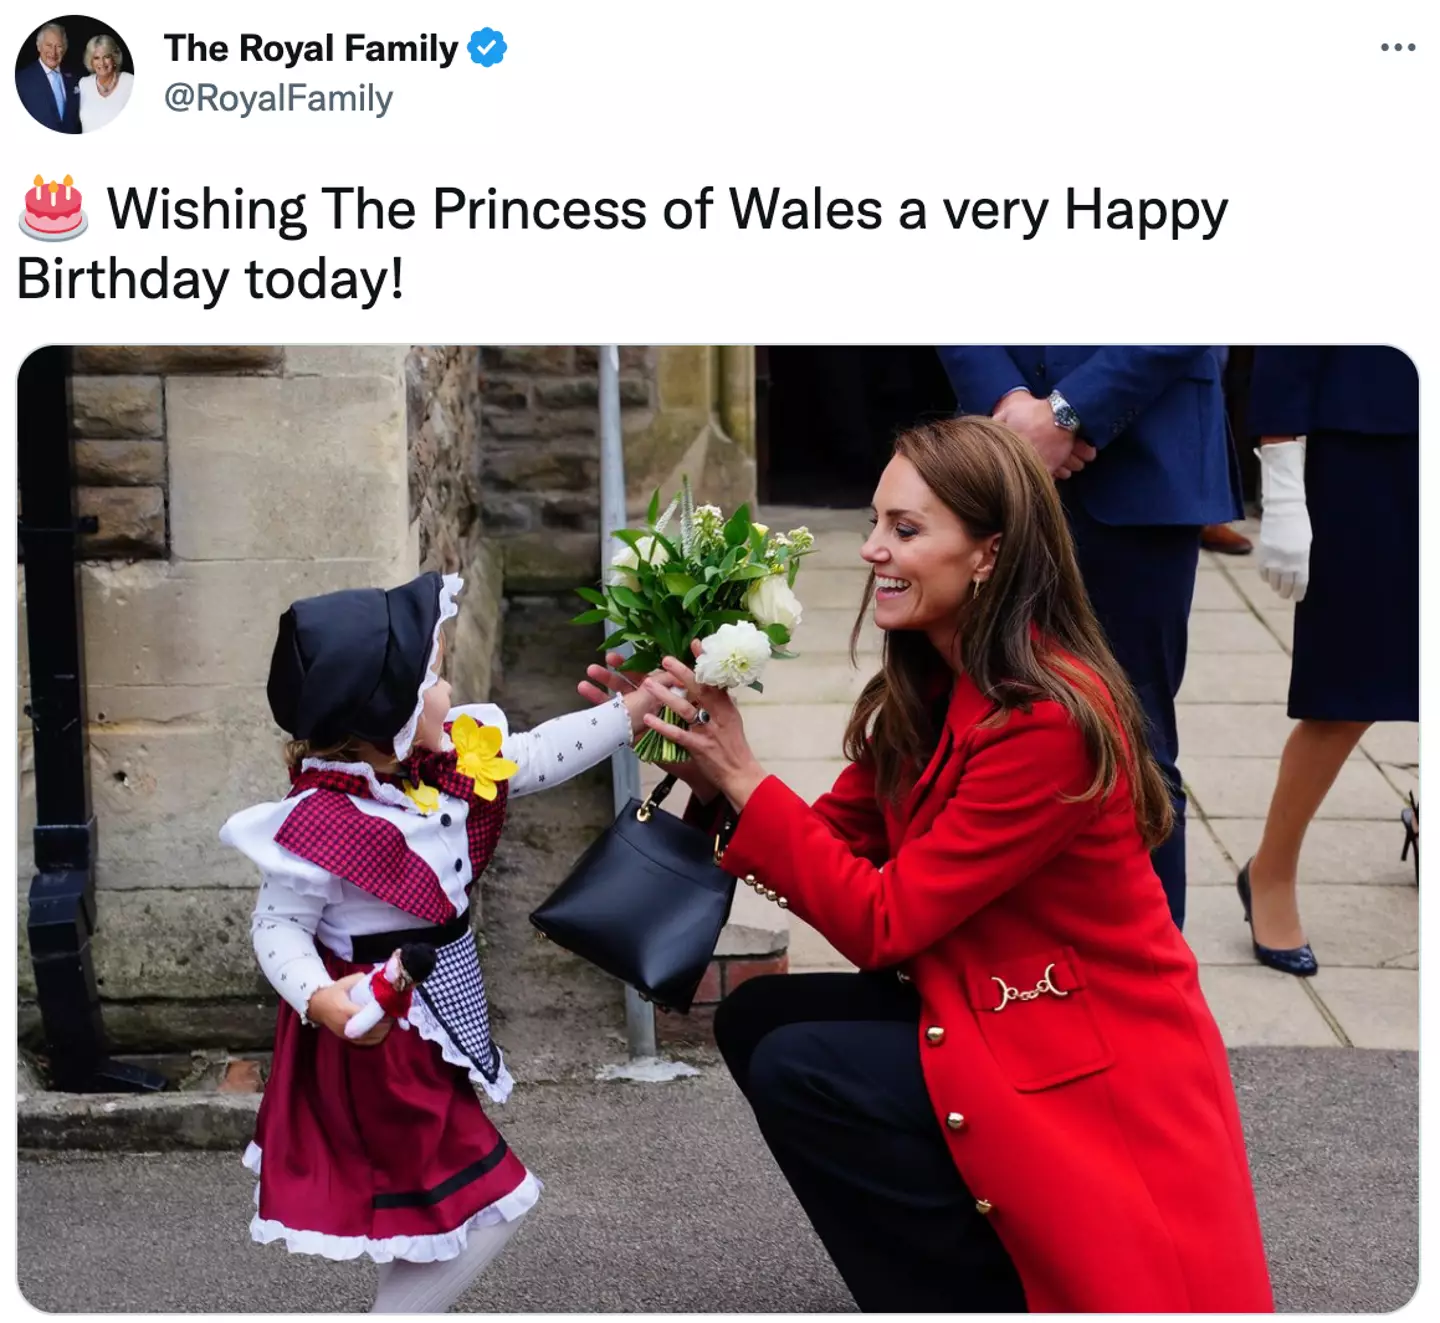 The royal family have wished the Princess of Wales a happy birthday.